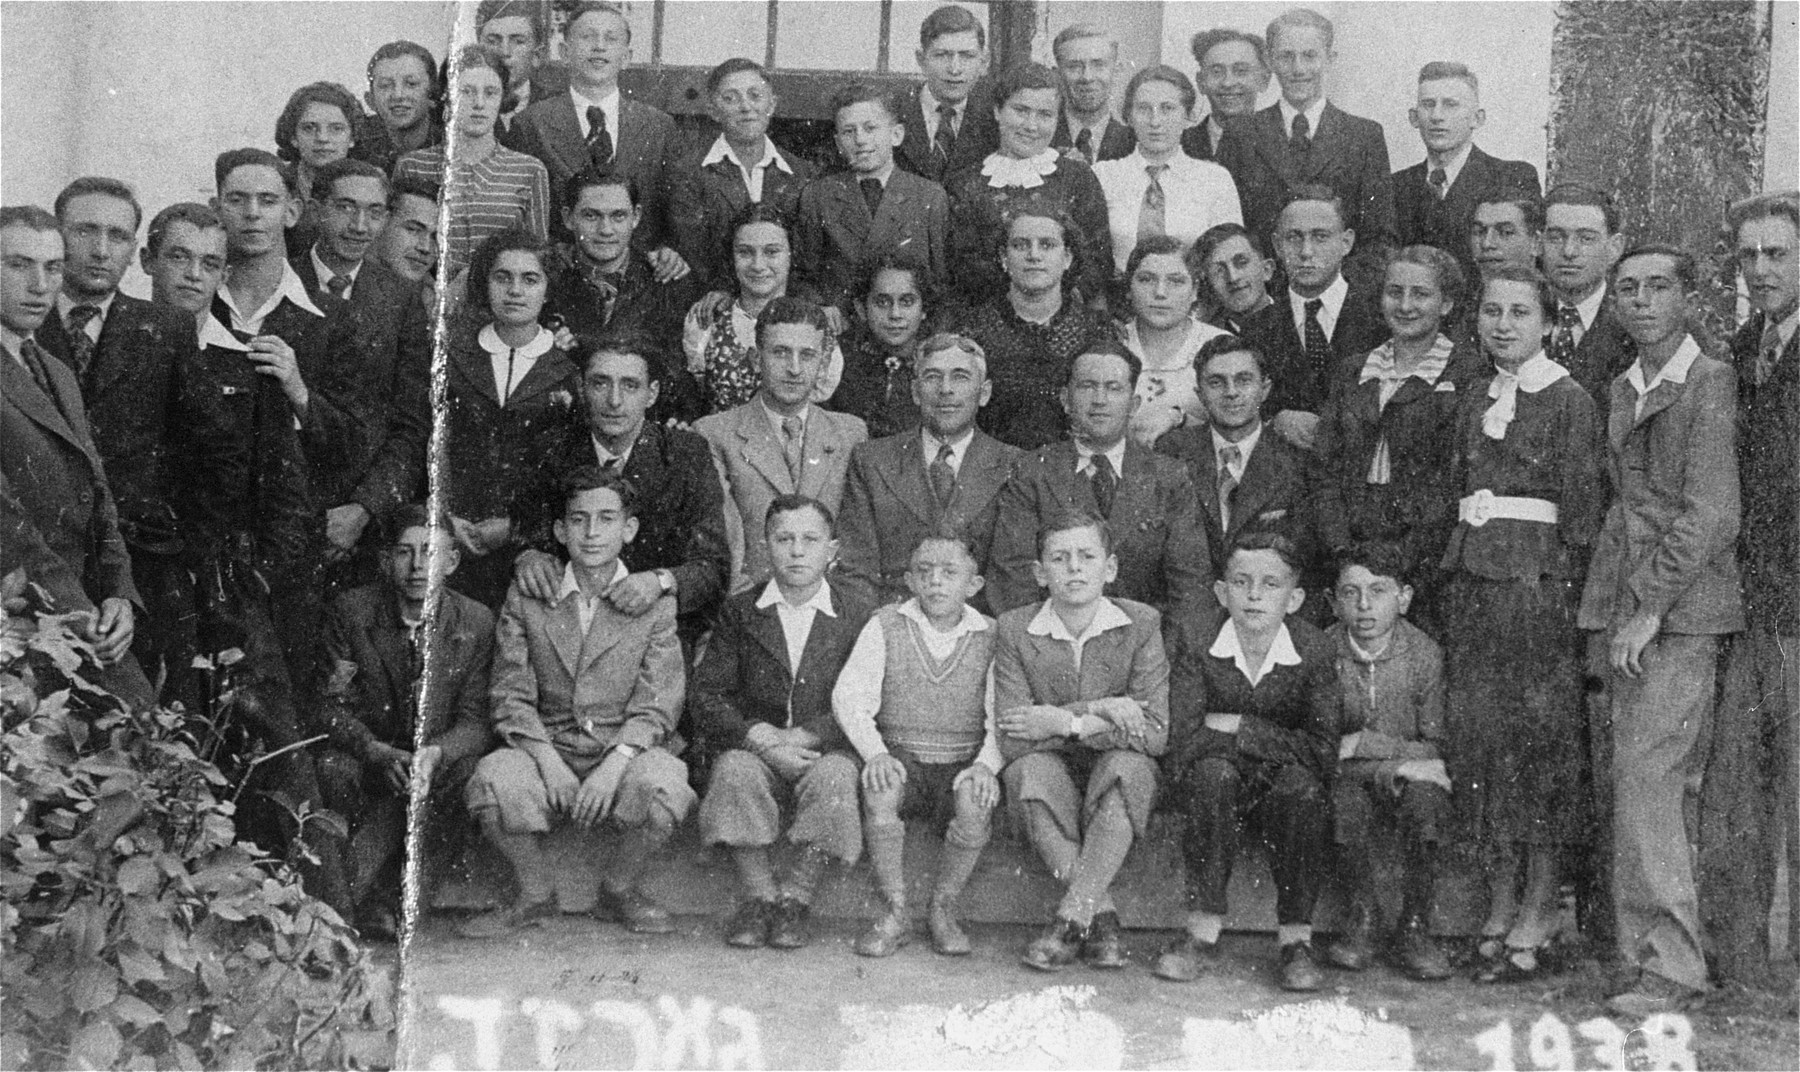 Group portrait of Jewish youth in Gargzdai, Lithuania.